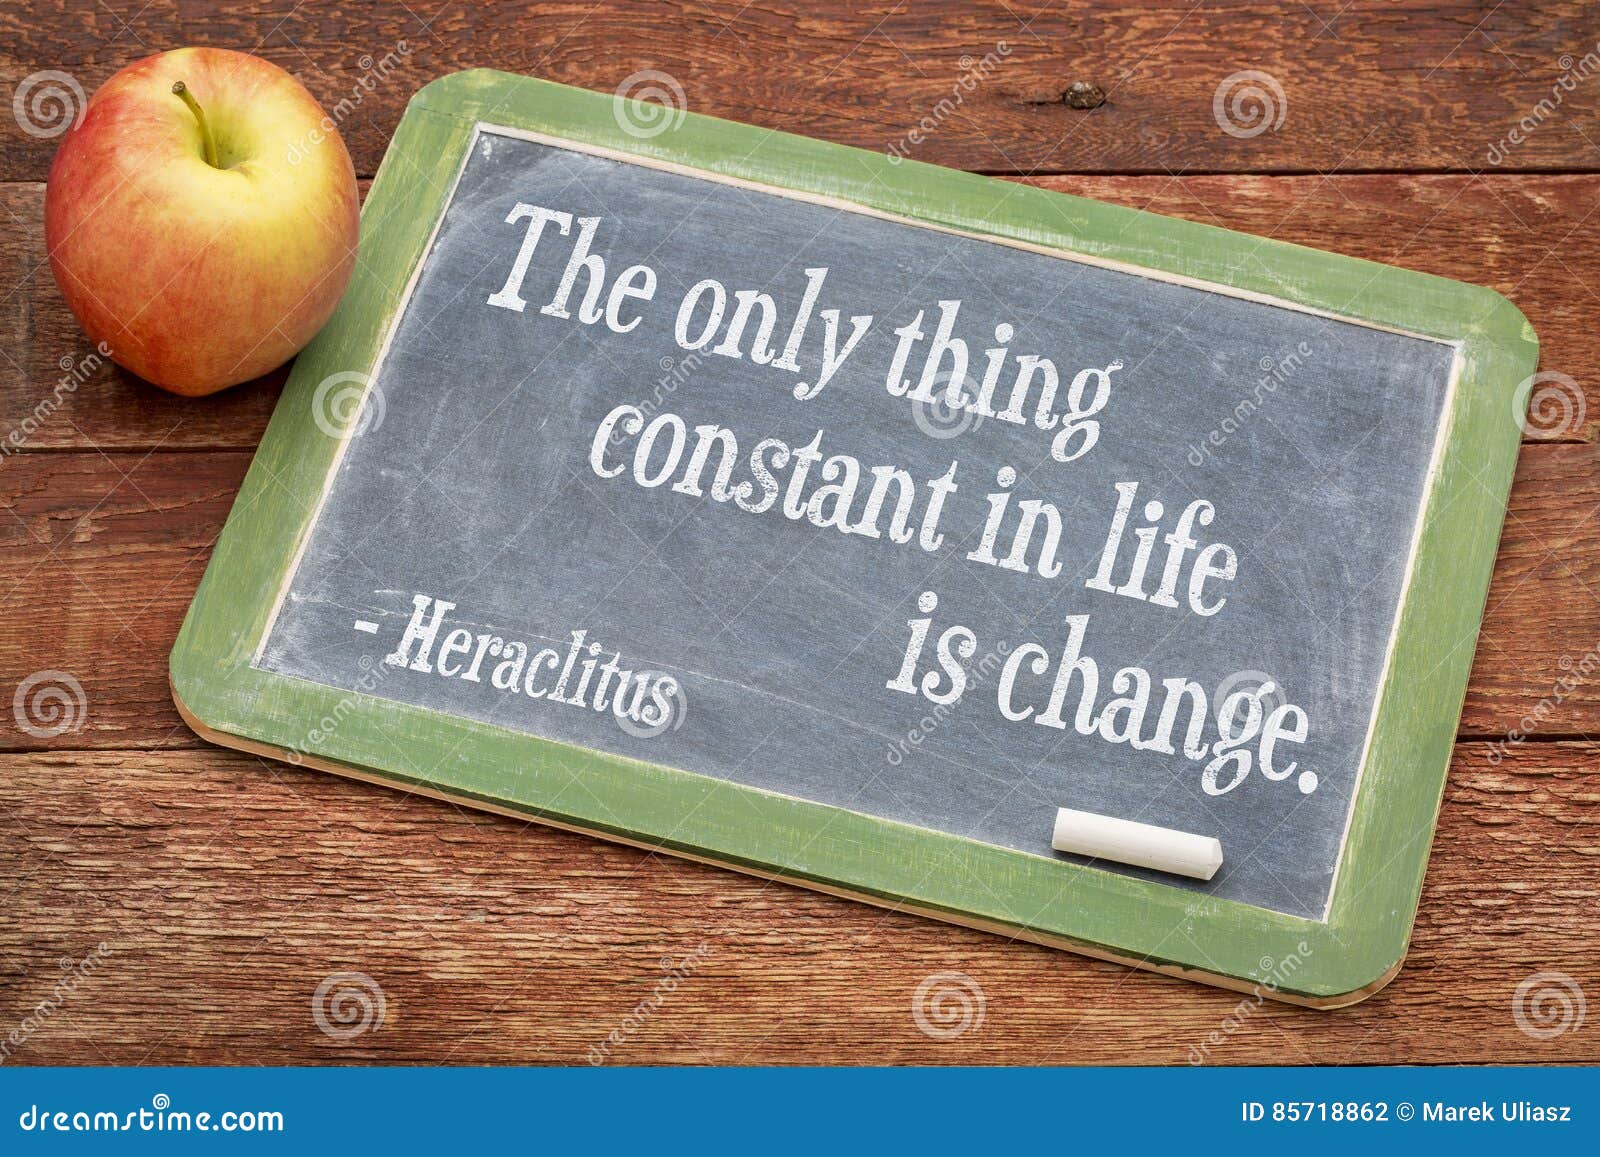 Royalty Free Stock Download ly Thing Constant In Life Is Change